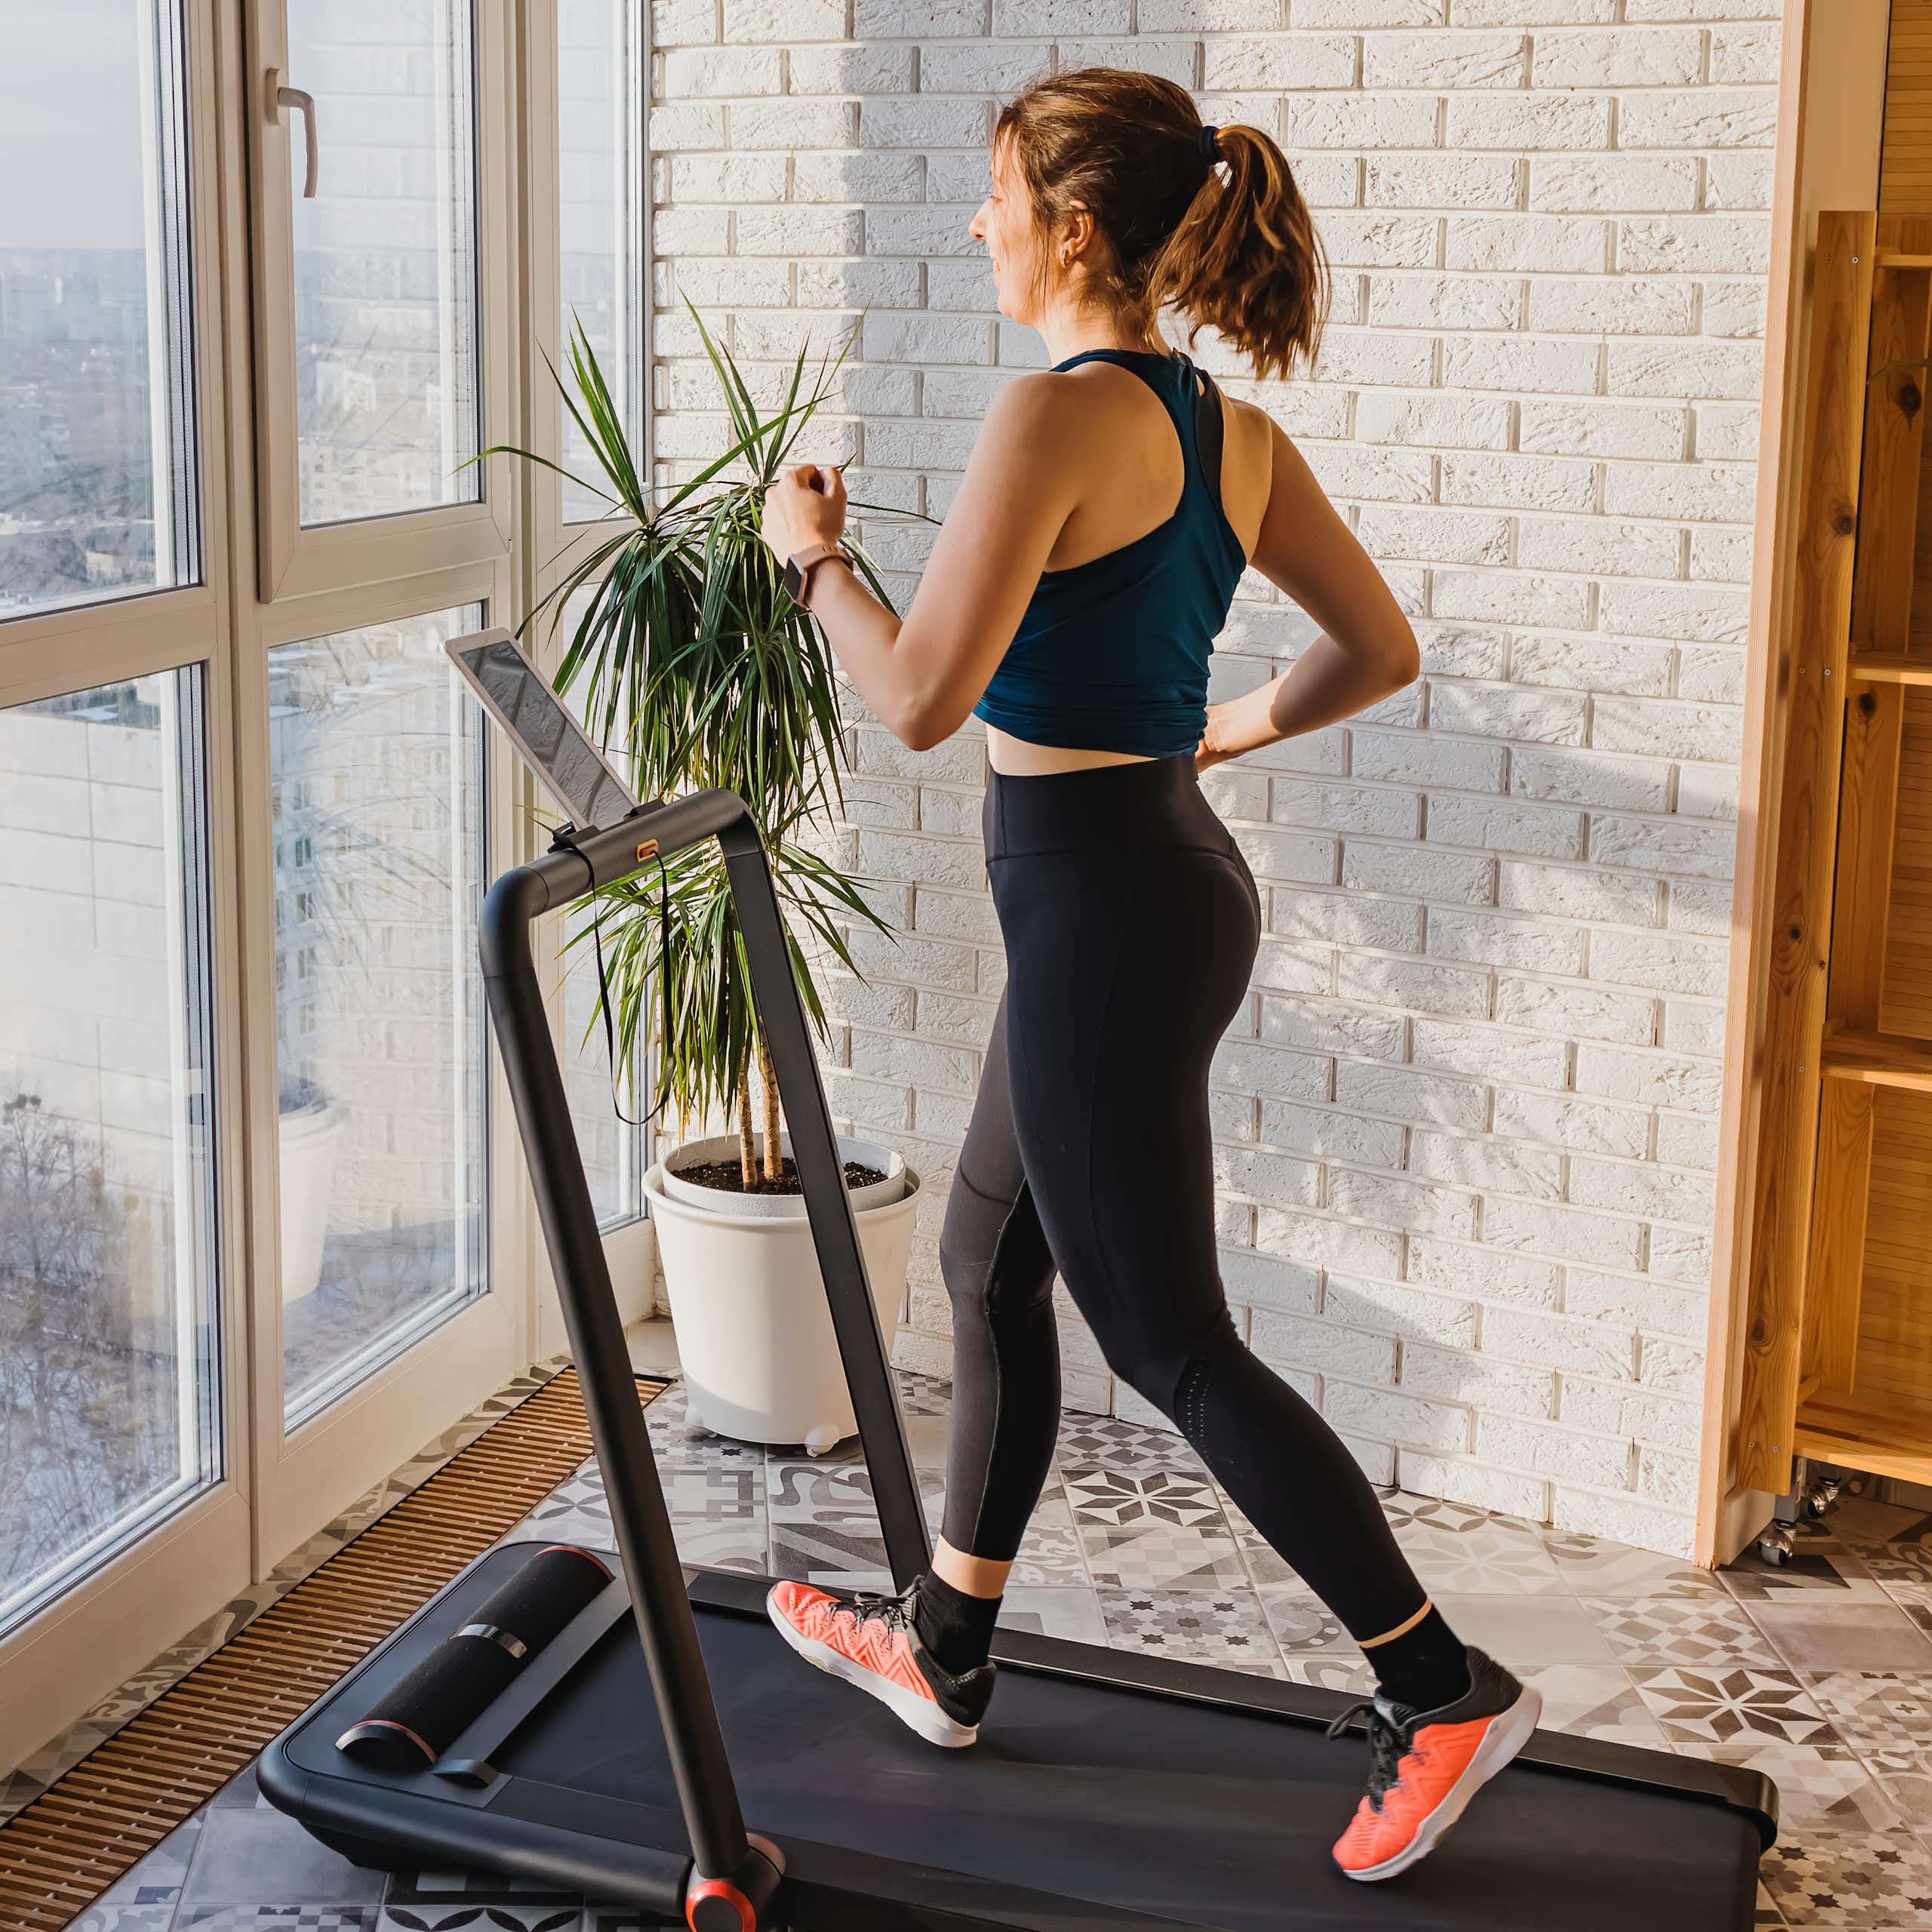 A woman walking on a treadmill at home.